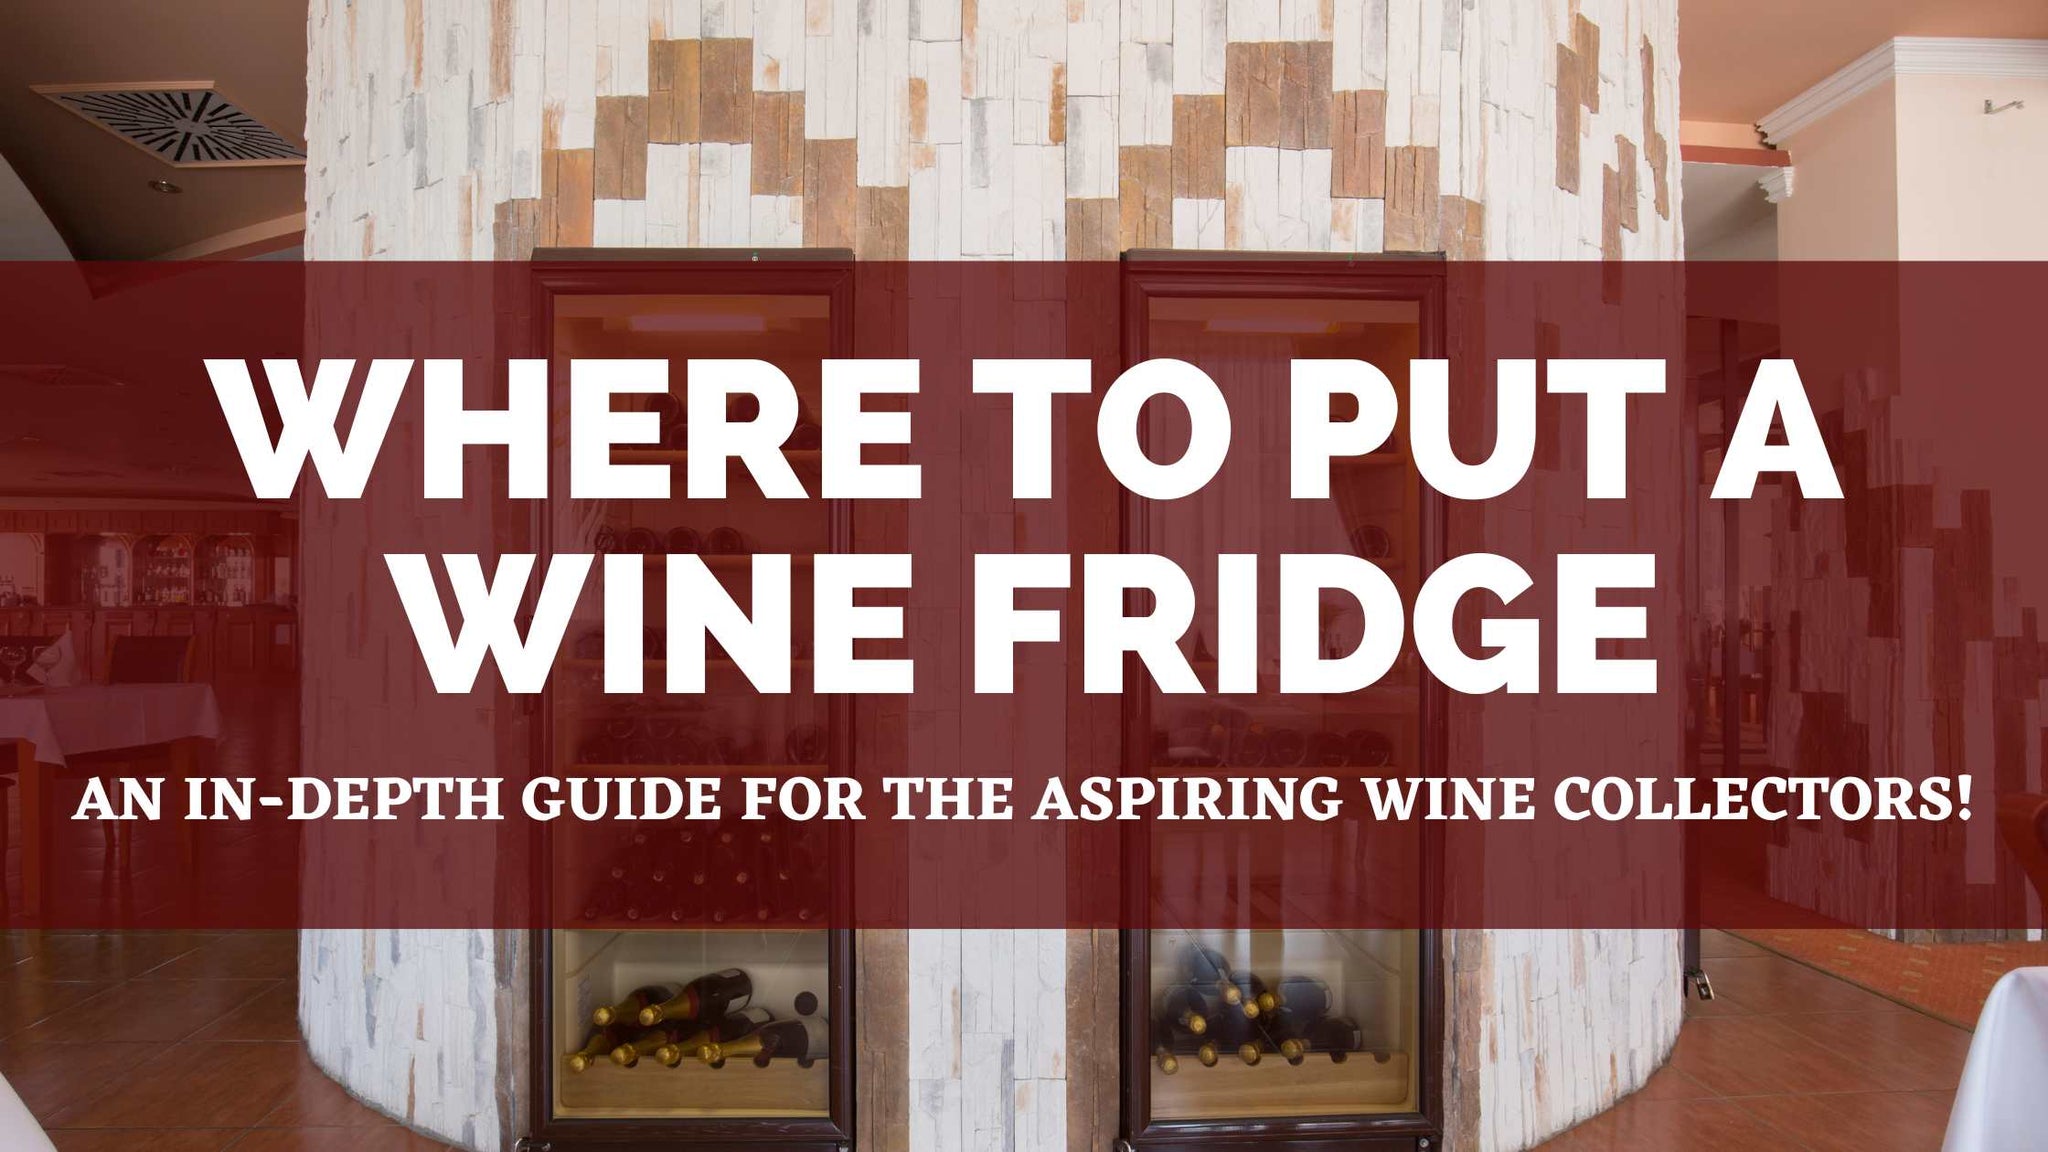 Where to put a wine fridge: An in-depth guide for the aspiring wine collectors!